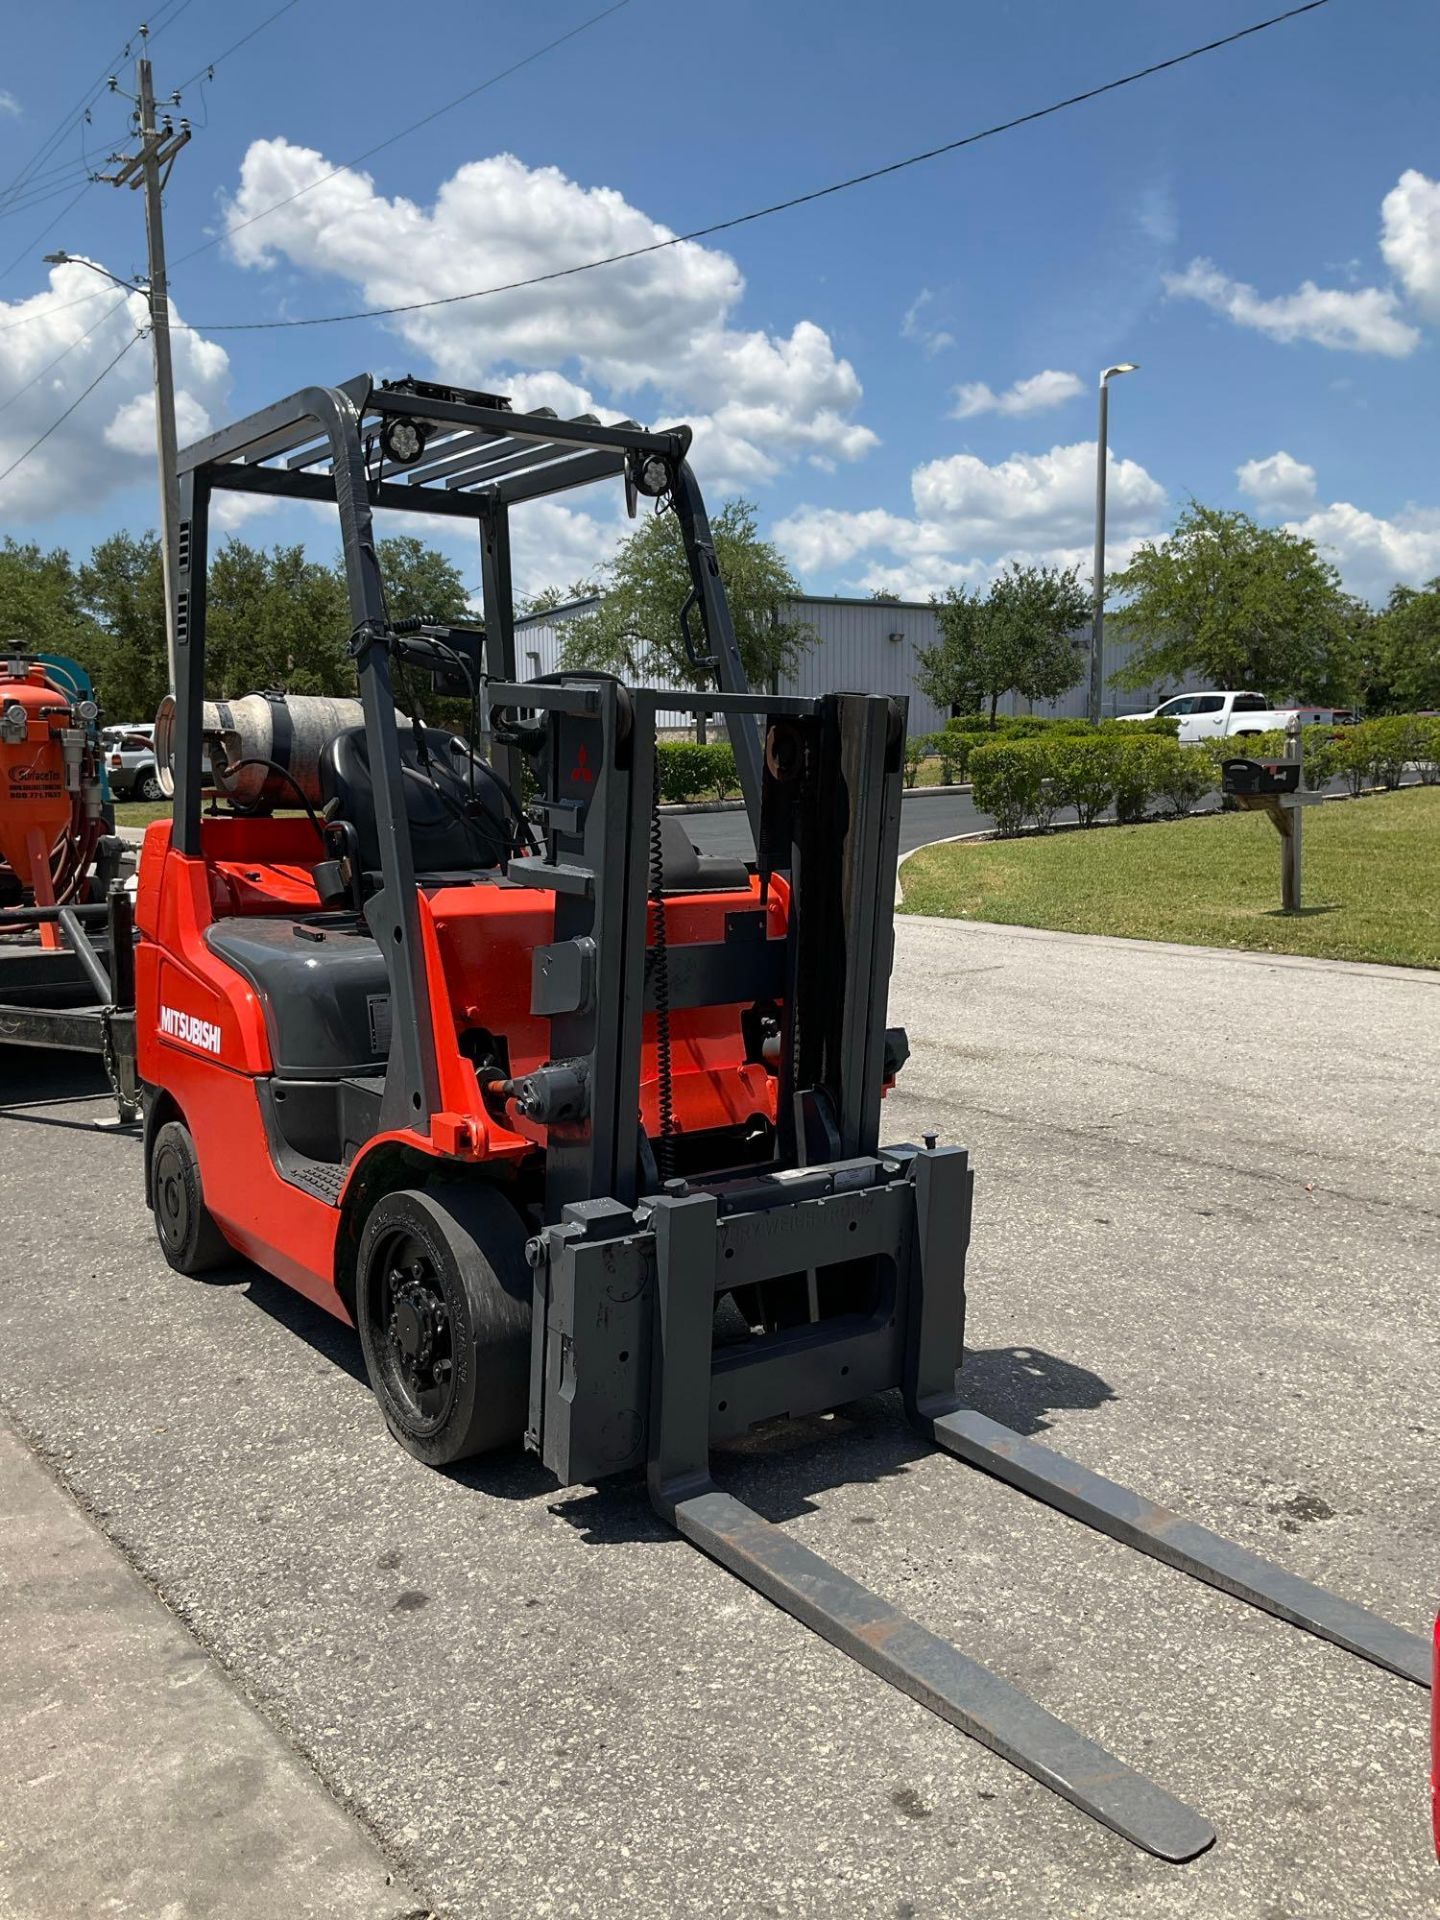 MITSUBISHI FORKLIFT MODEL FGC25N-LP, LP POWERED, APPROX MAX CAPACITY 5000LBS - Image 8 of 14